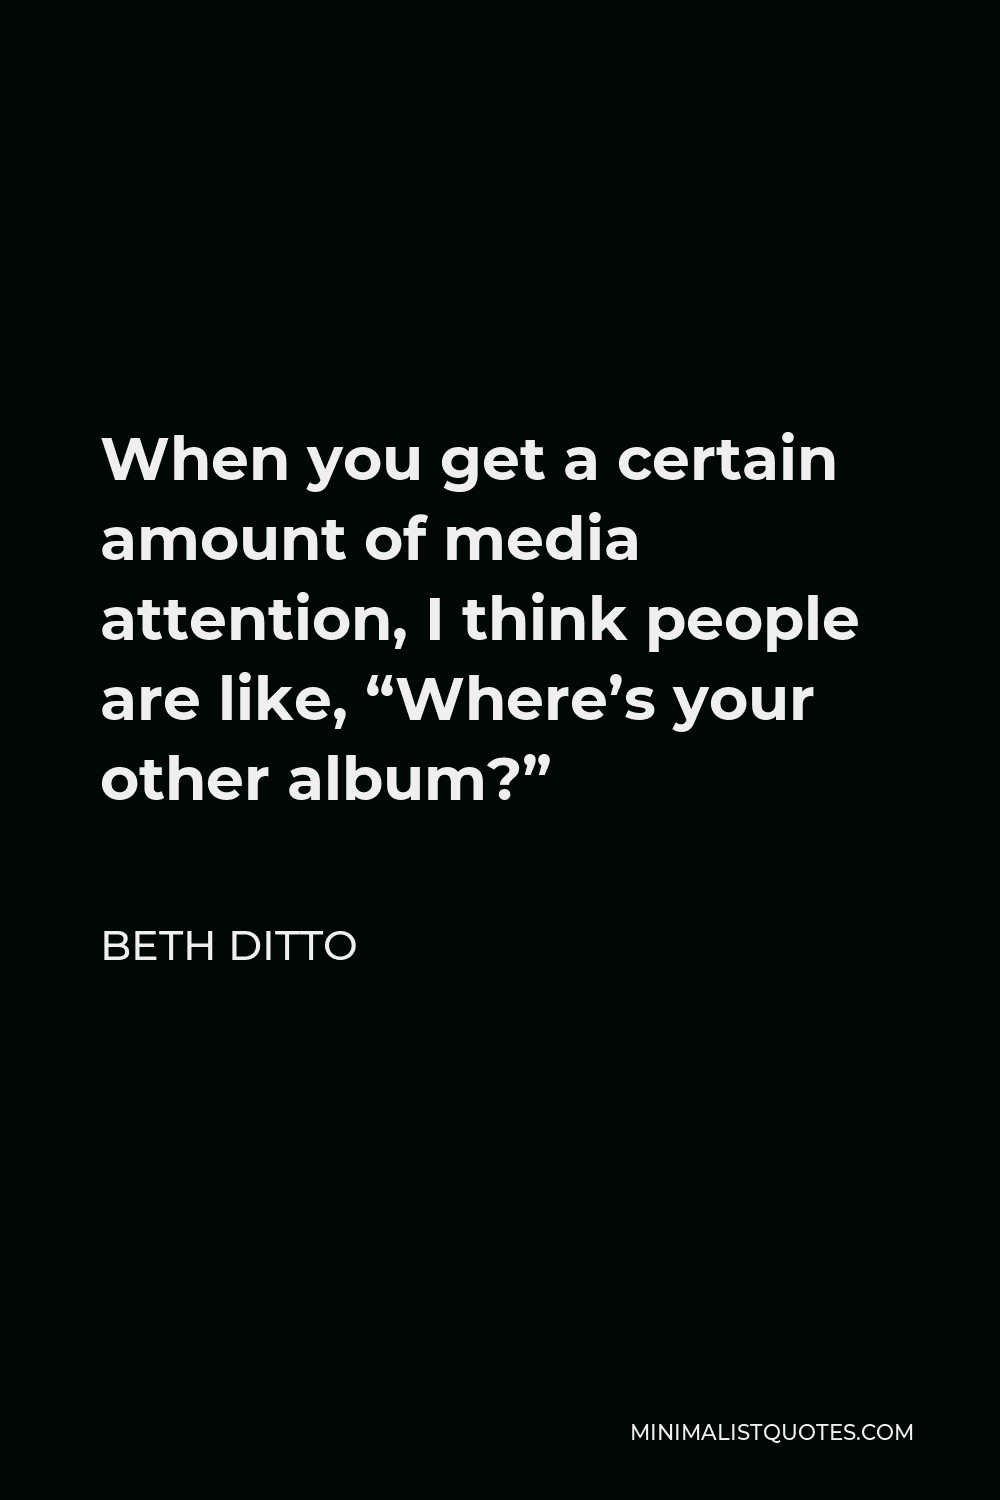 Beth Ditto Quote - When you get a certain amount of media attention, I think people are like, “Where’s your other album?”